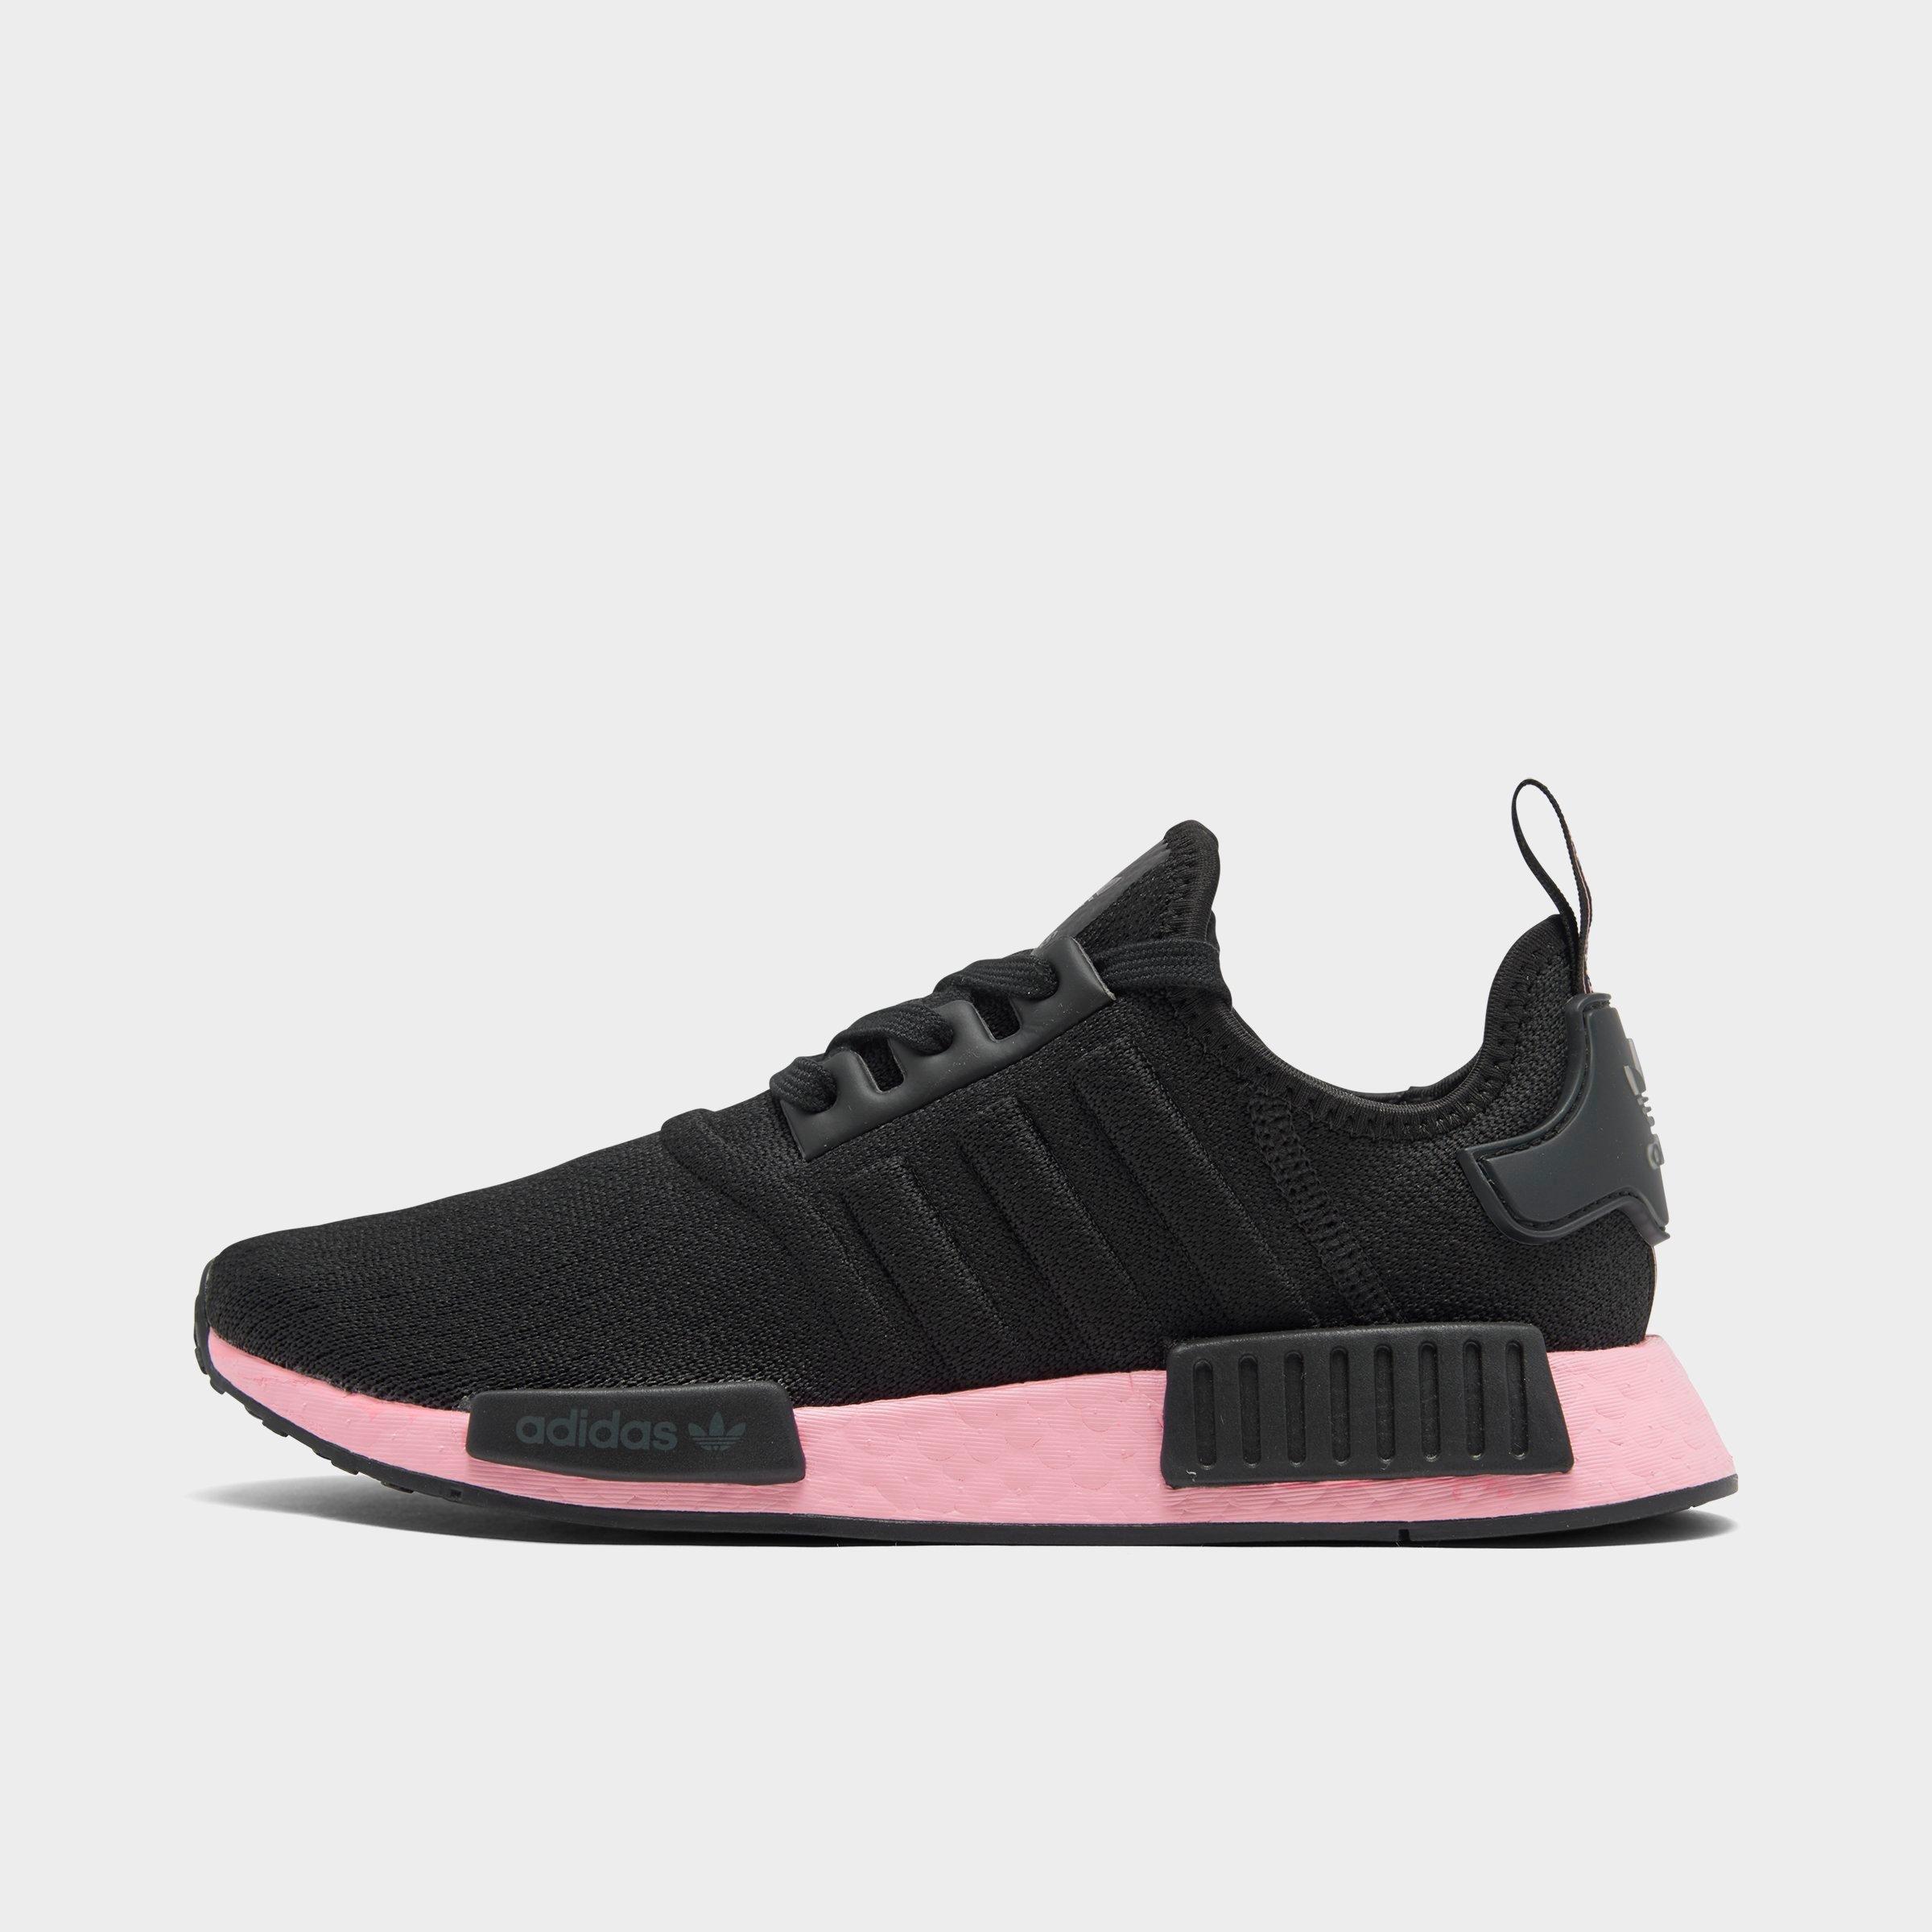 womens adidas nmd r1 black and pink